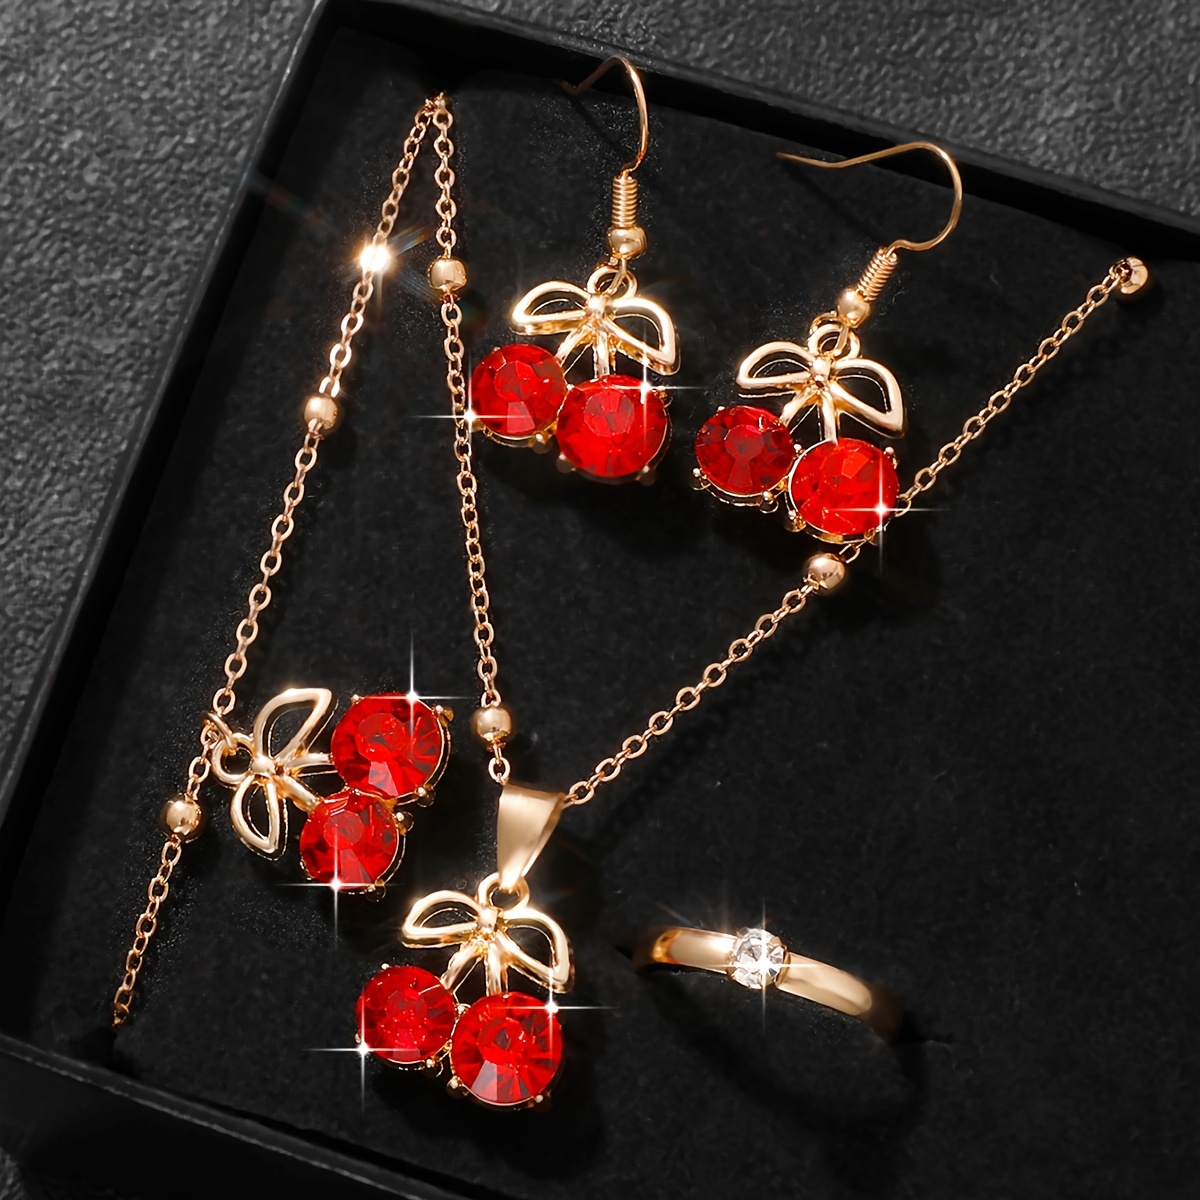 

5pcs/set Cute Cherry Pendant Alloy Jewelry Set, Elegant Minimalist Style, Perfect For Daily Wear Or Gift, Versatile For All Seasons